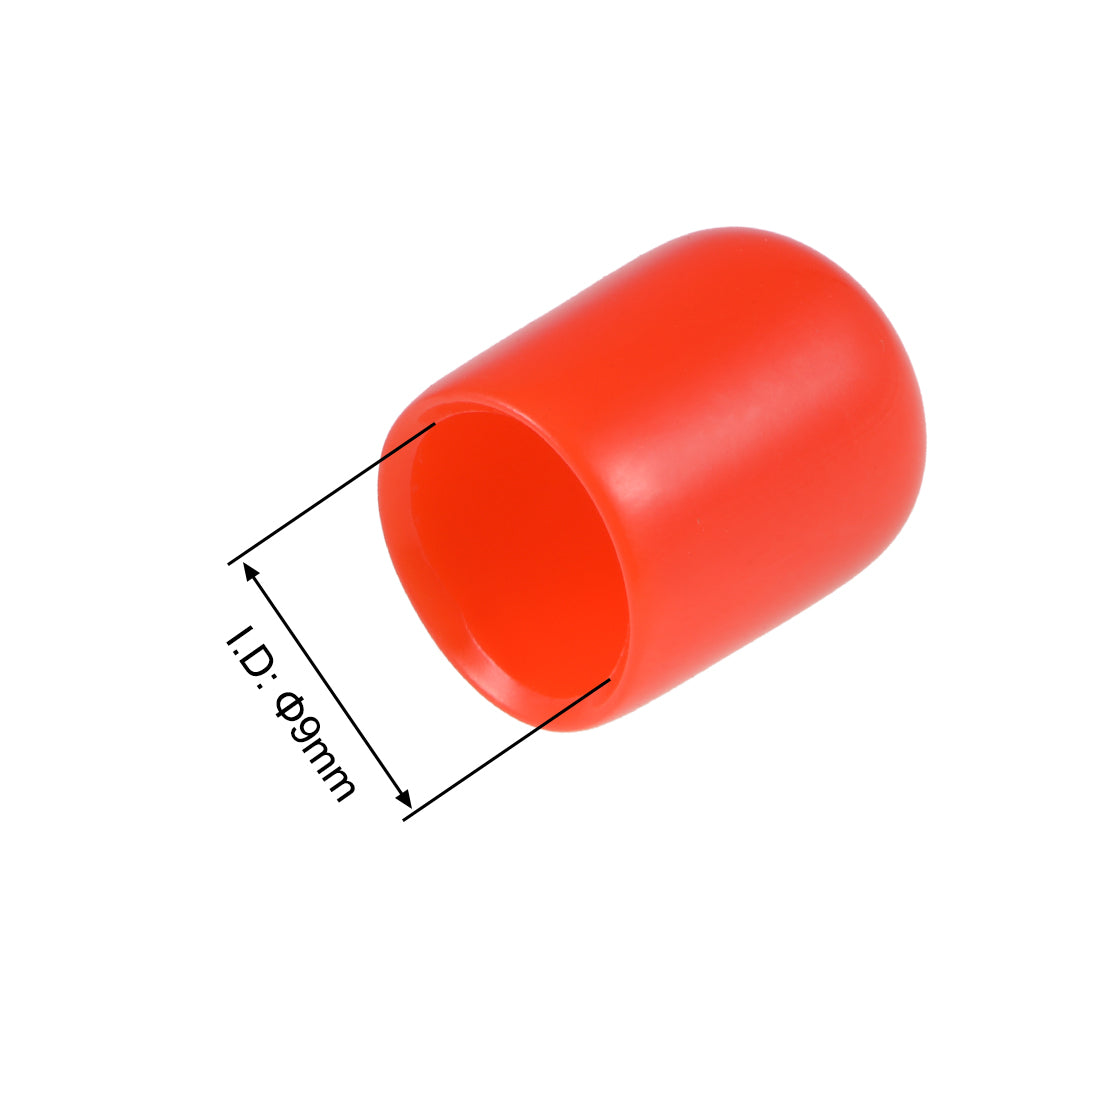 uxcell Uxcell 200pcs Rubber End Caps 9mm ID 15mm Height Screw Thread Protectors Red